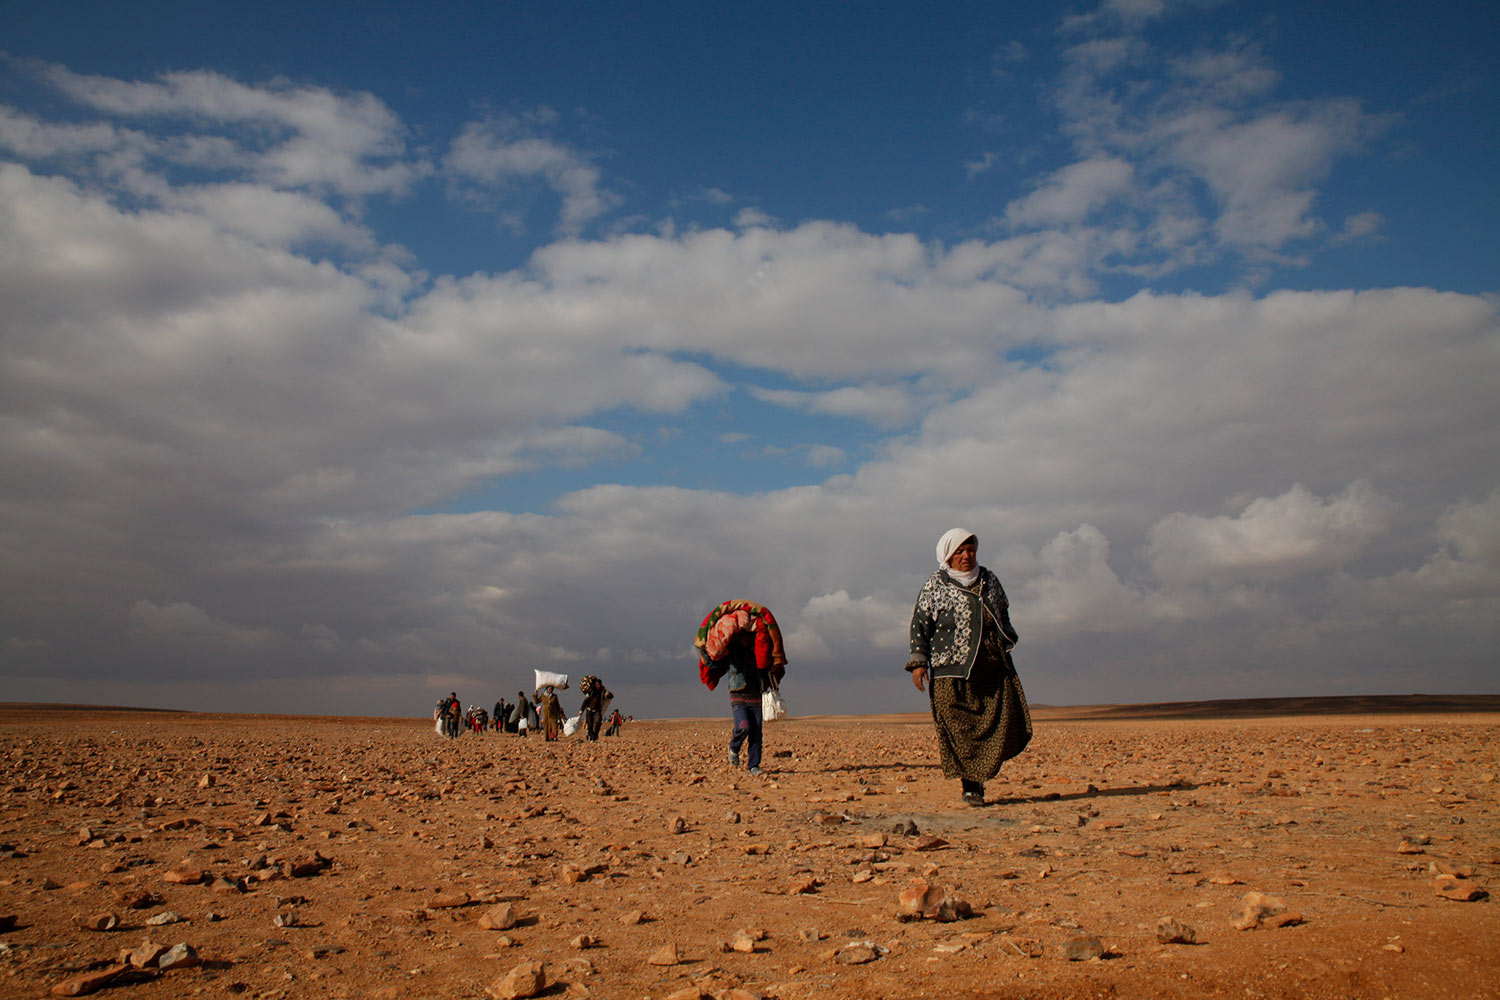 Refugees at the Syrian Border. USHMM/Lucian Perkins.